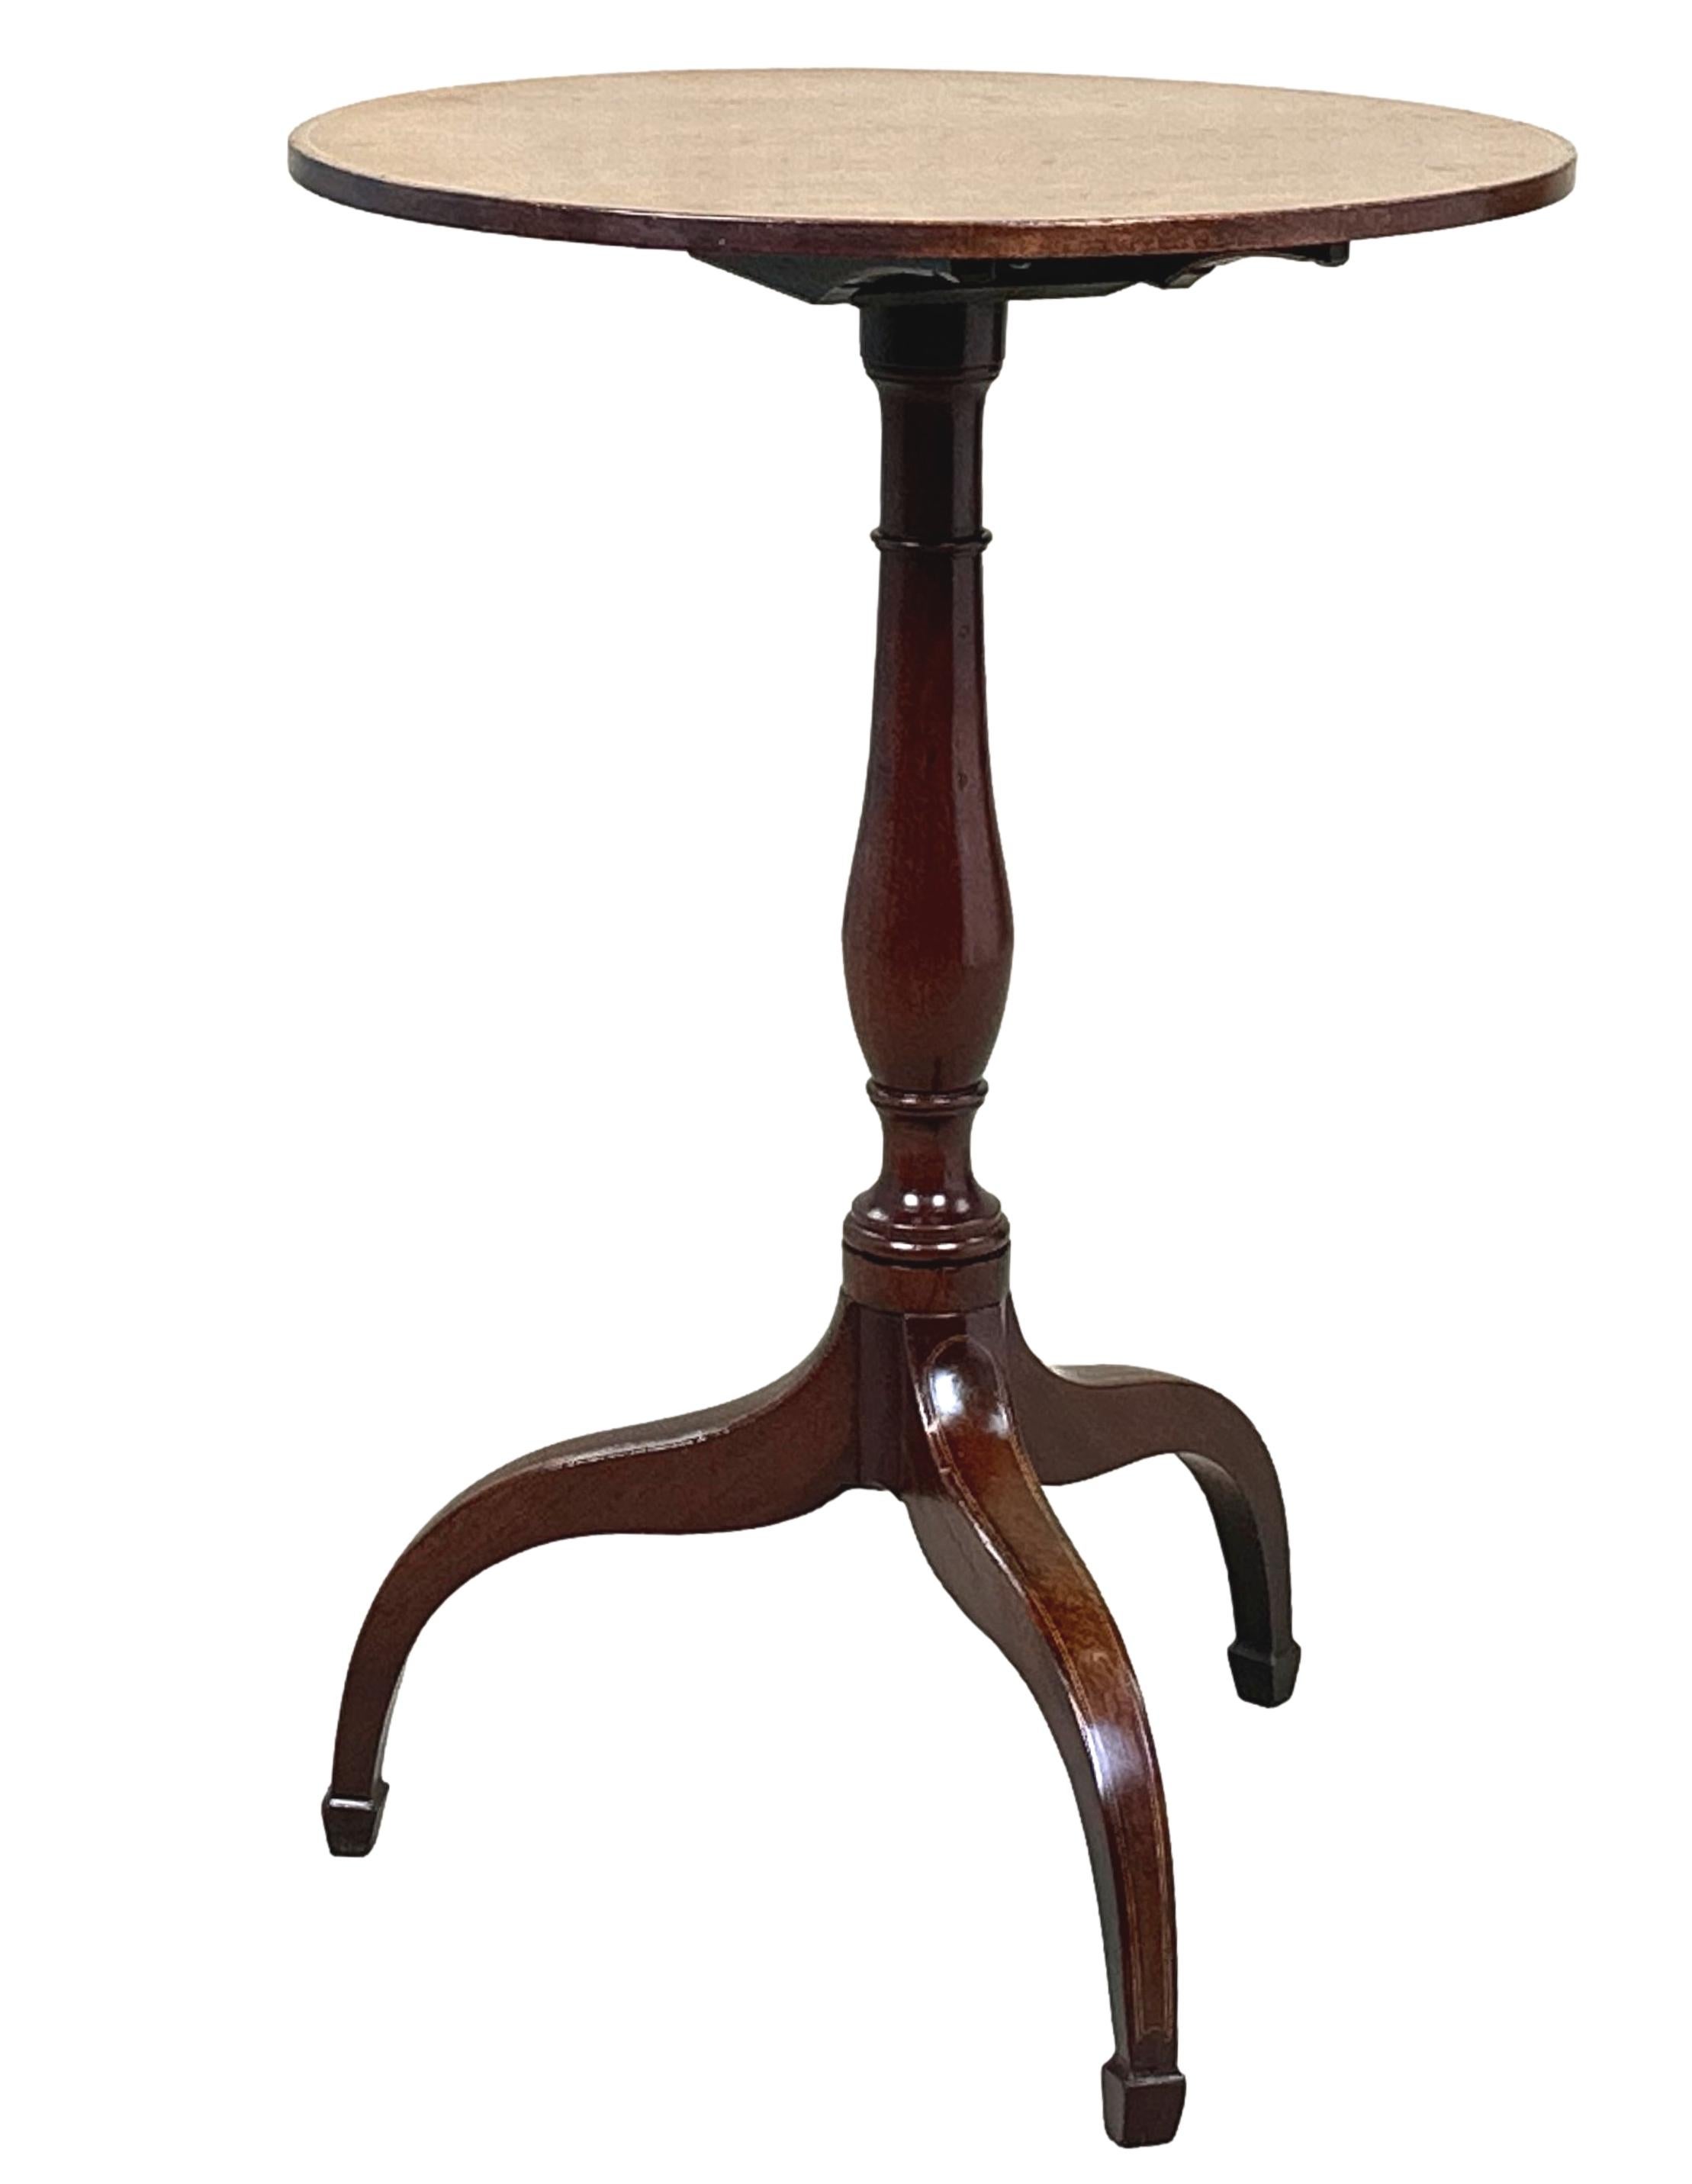 Georgian Mahogany Circular Wine Table In Good Condition For Sale In Bedfordshire, GB